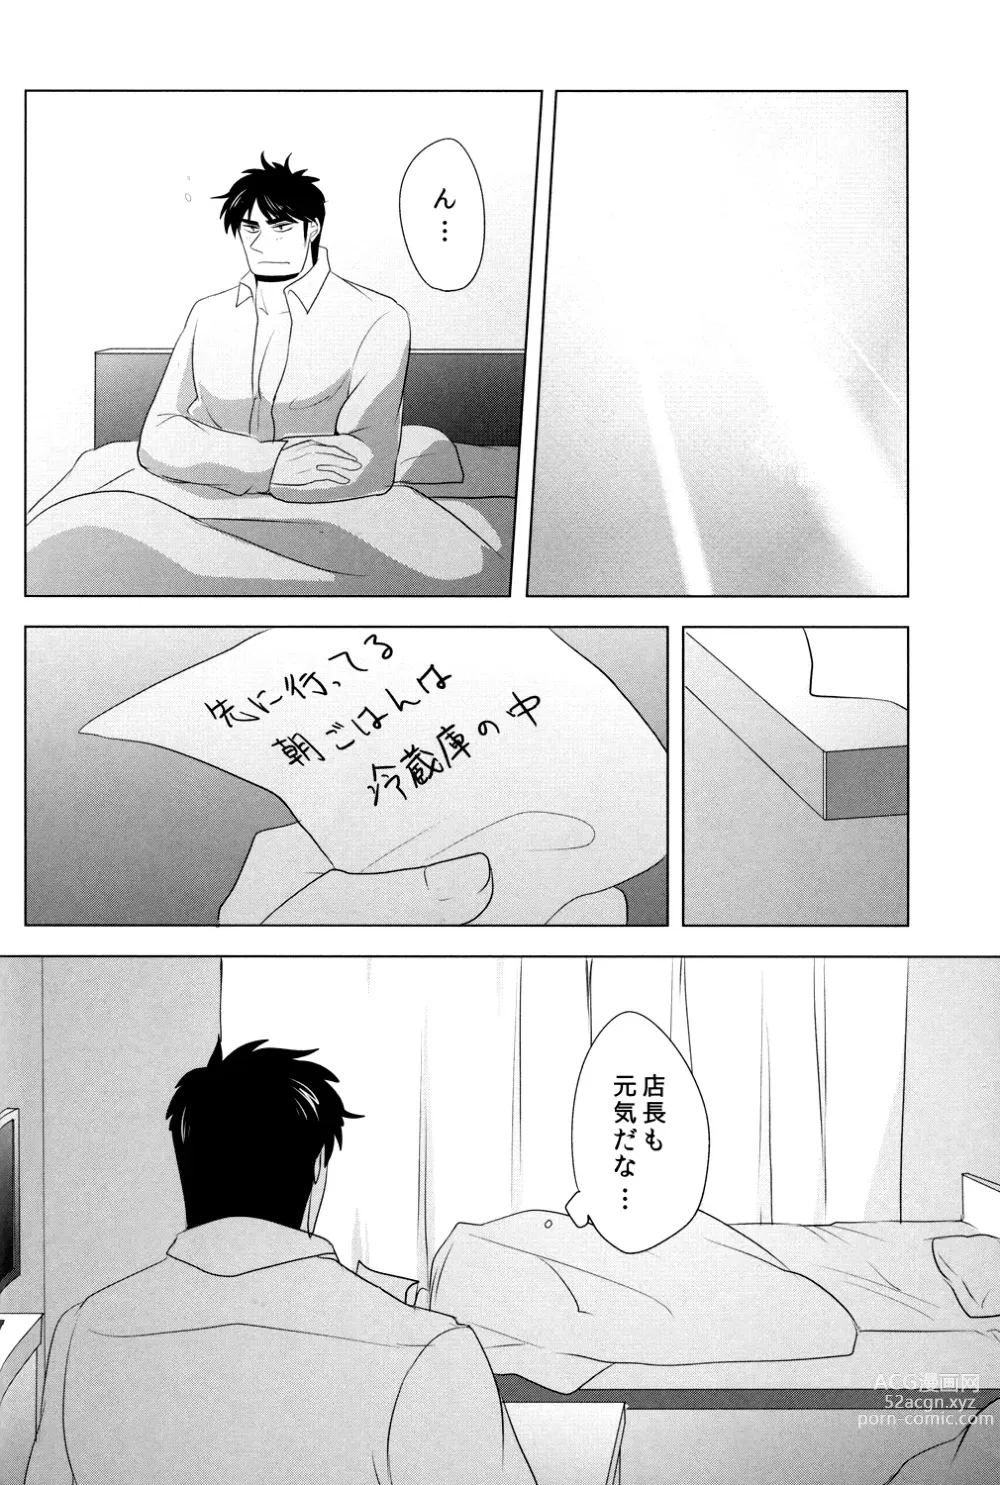 Page 18 of doujinshi Red Dog